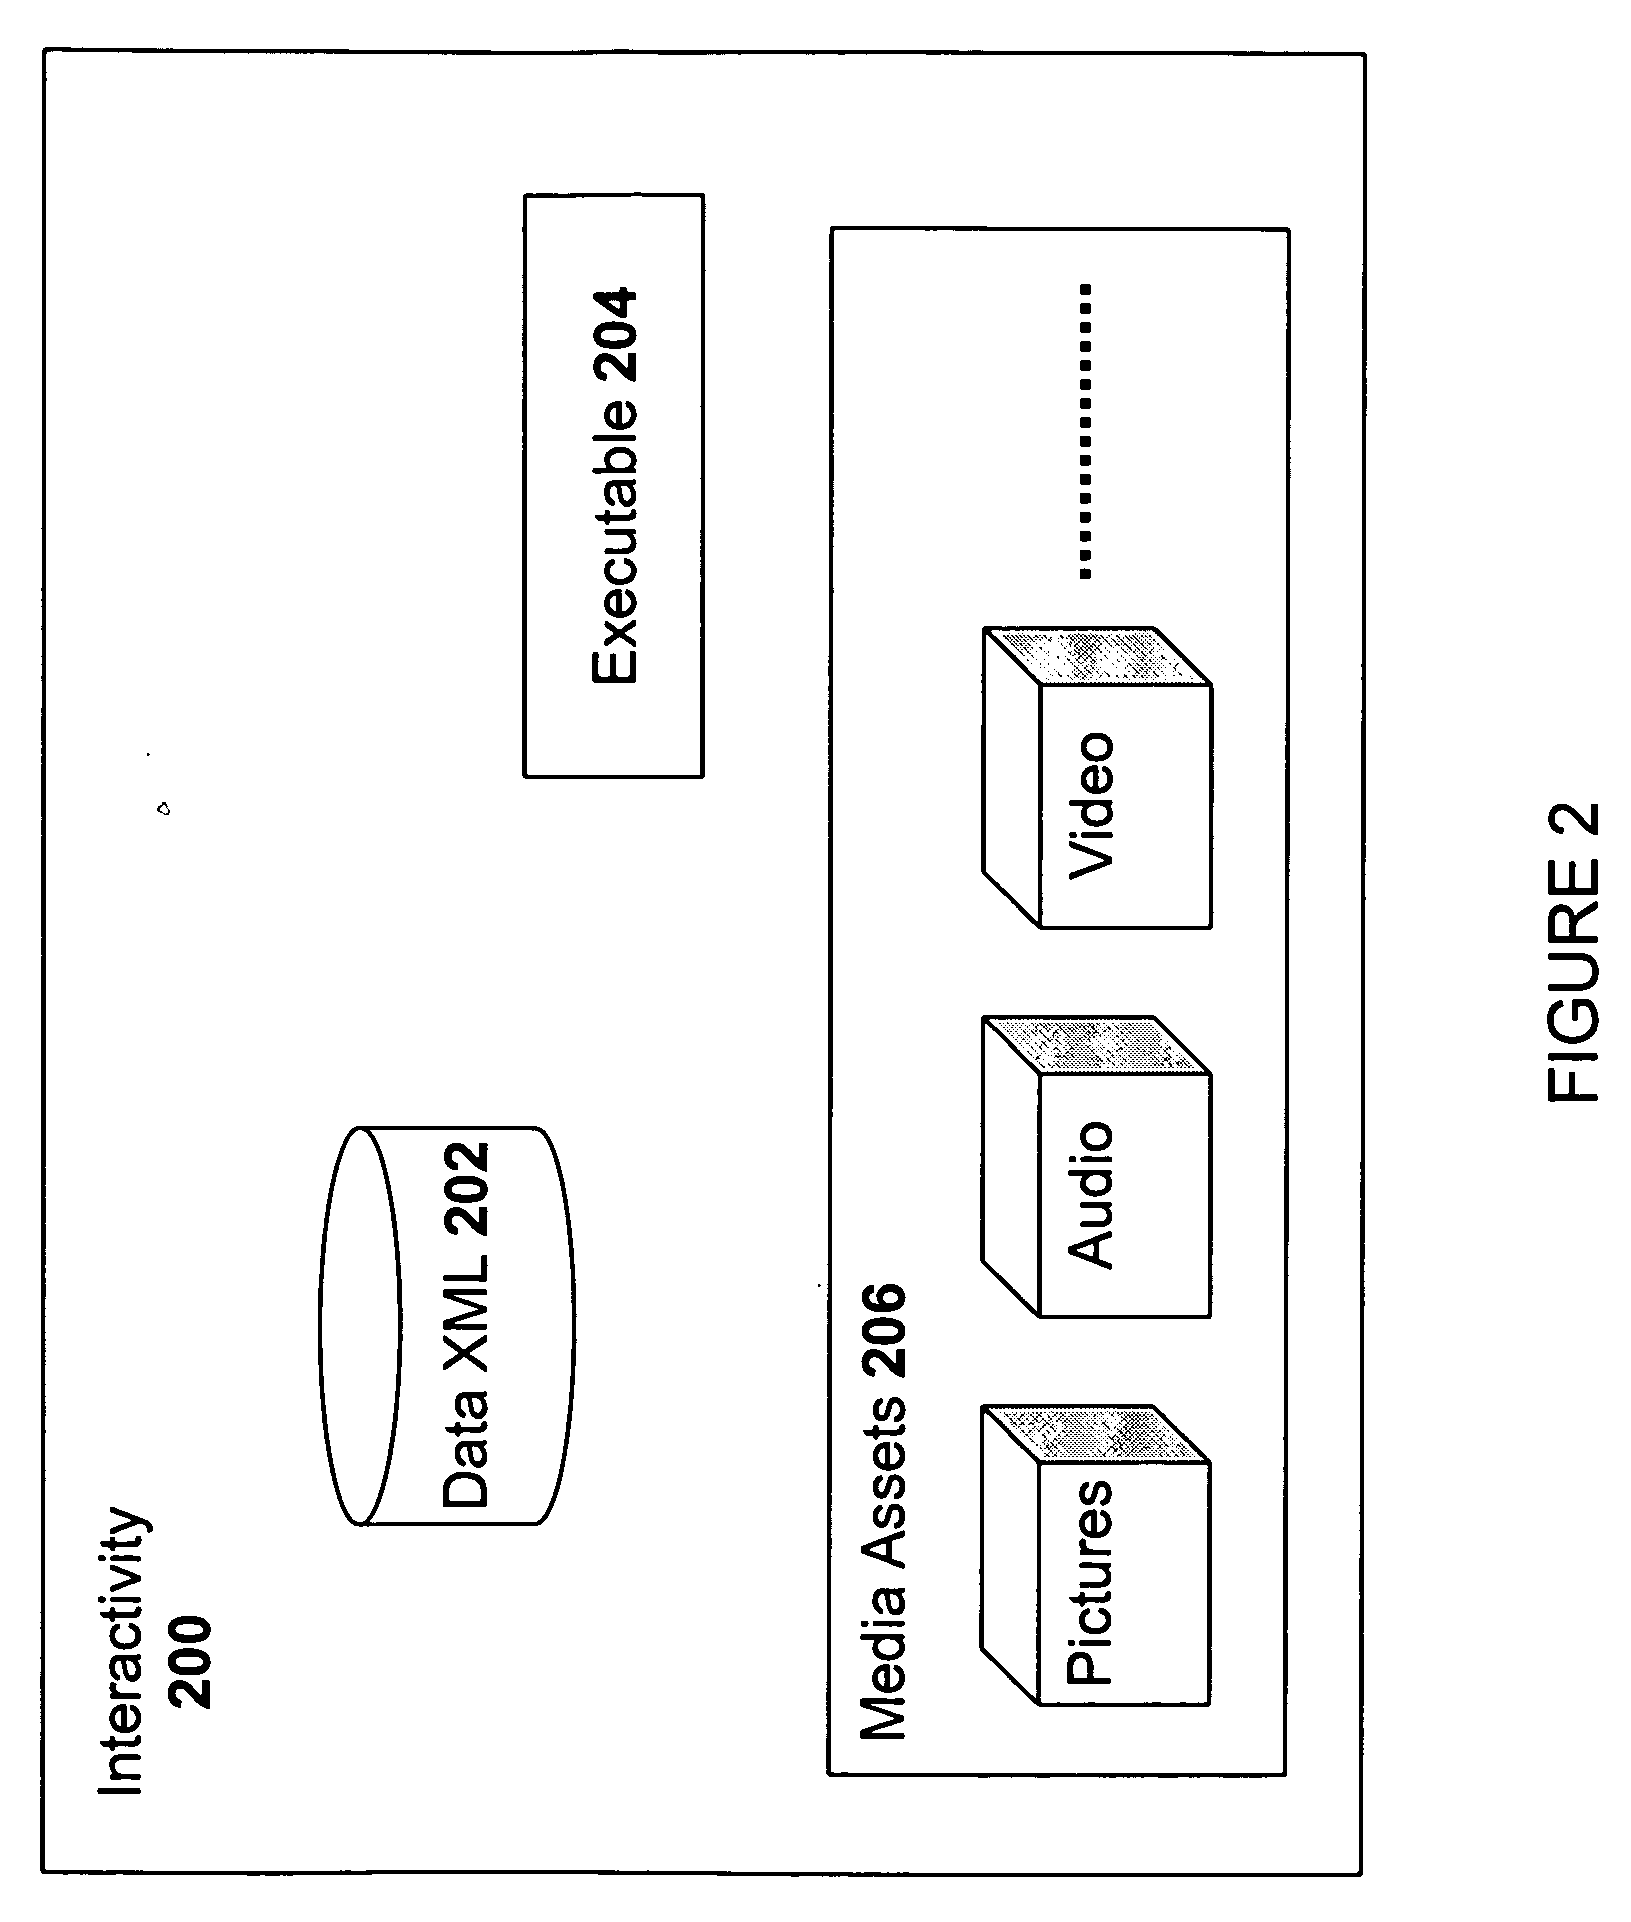 System and a method for interactivity creation and customization